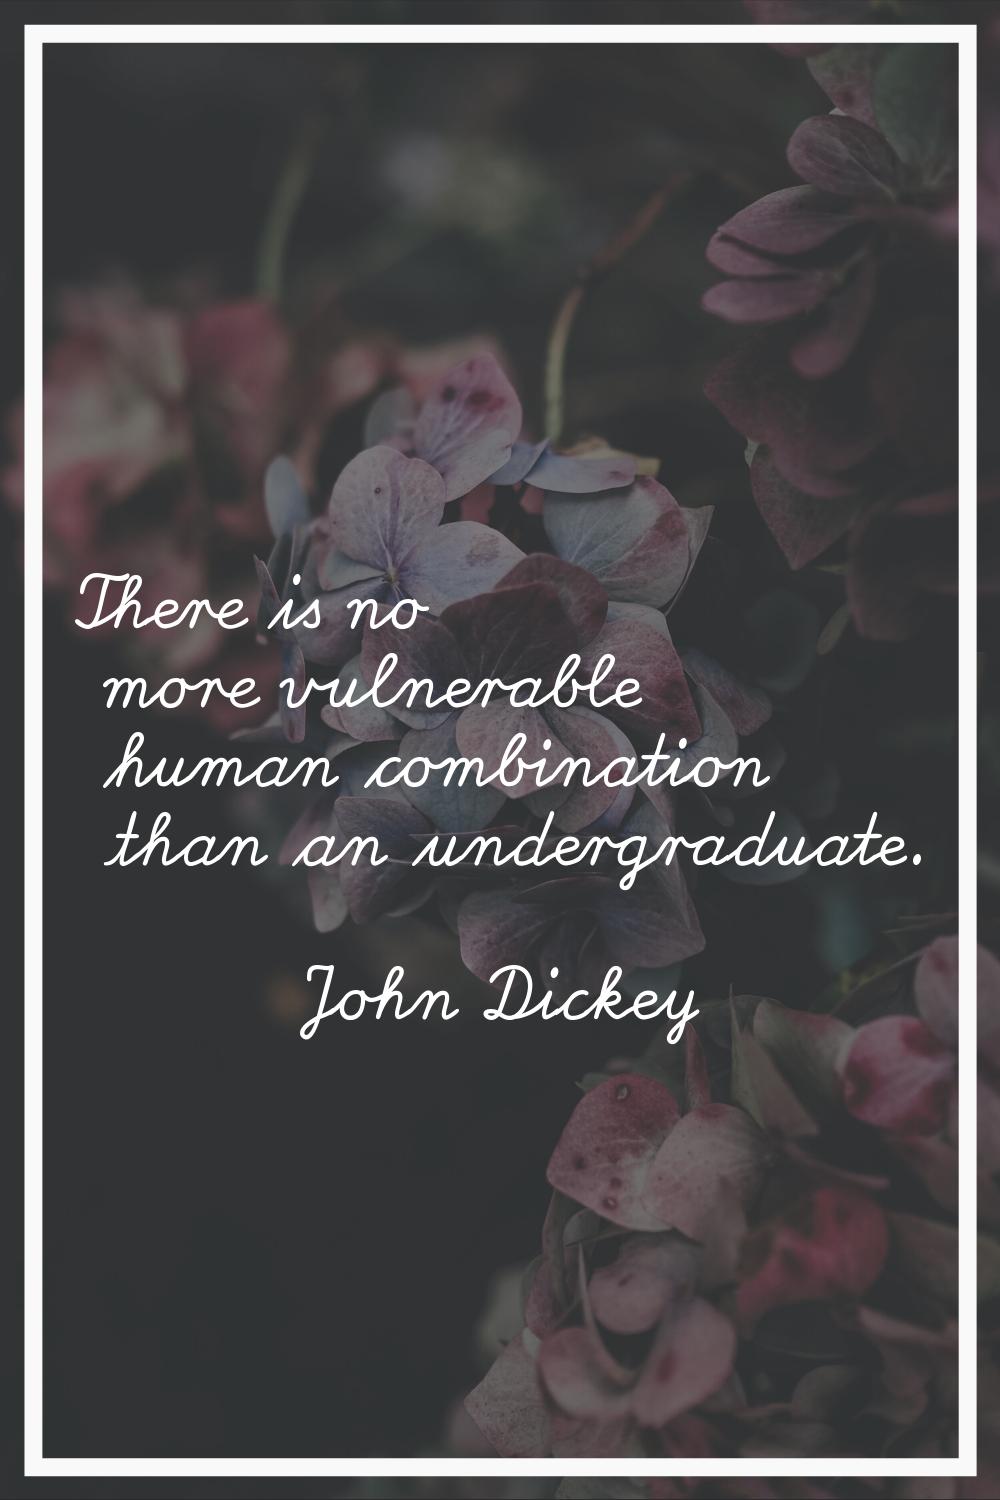 There is no more vulnerable human combination than an undergraduate.